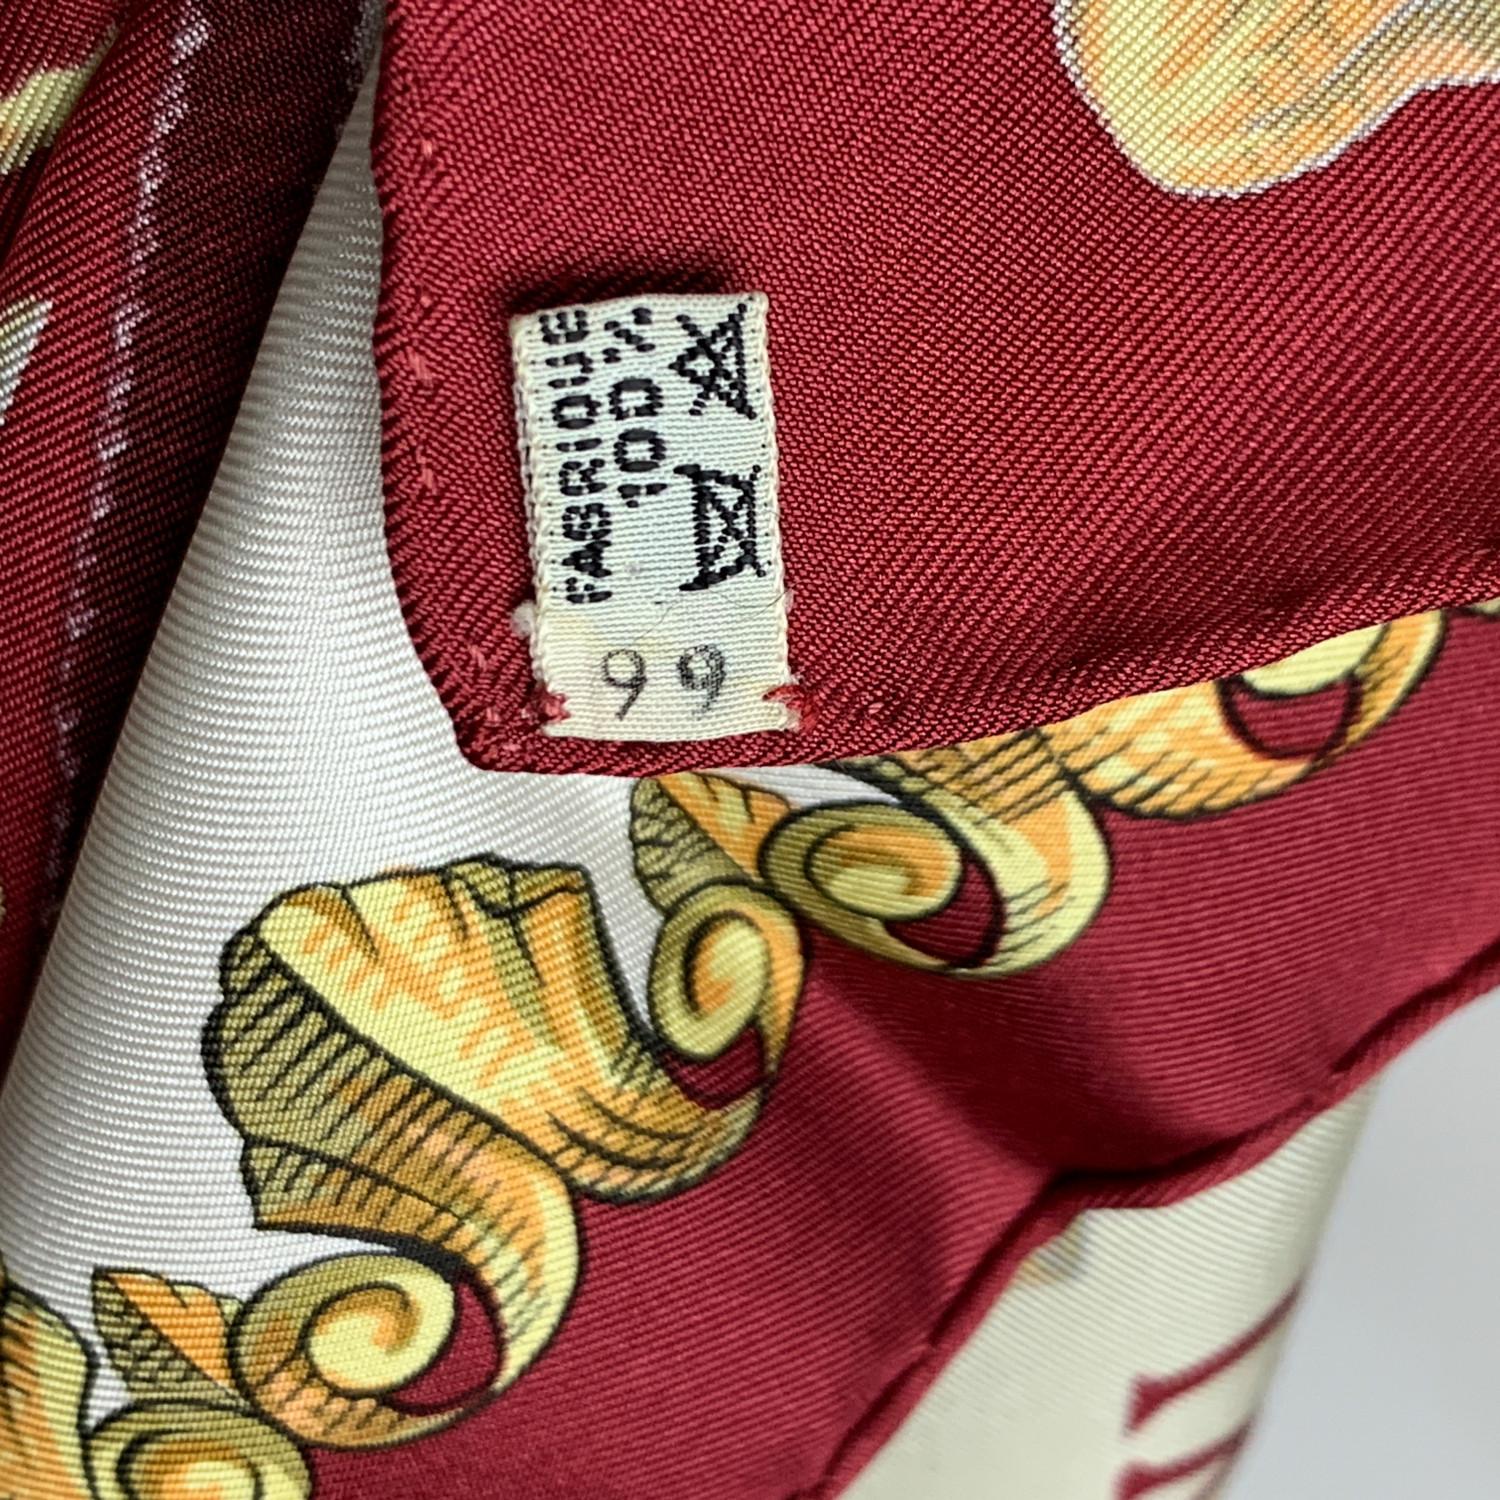 Hermes 'Louis XIV - Ludovicus Magnus' silk scarf designed by popular Hermes artist, Francoise de la Perriere and first issued in 1963. Inspired by the Sun King himself, this scarf pays tribute to one of Frances most famous kings, Louis XIV. The